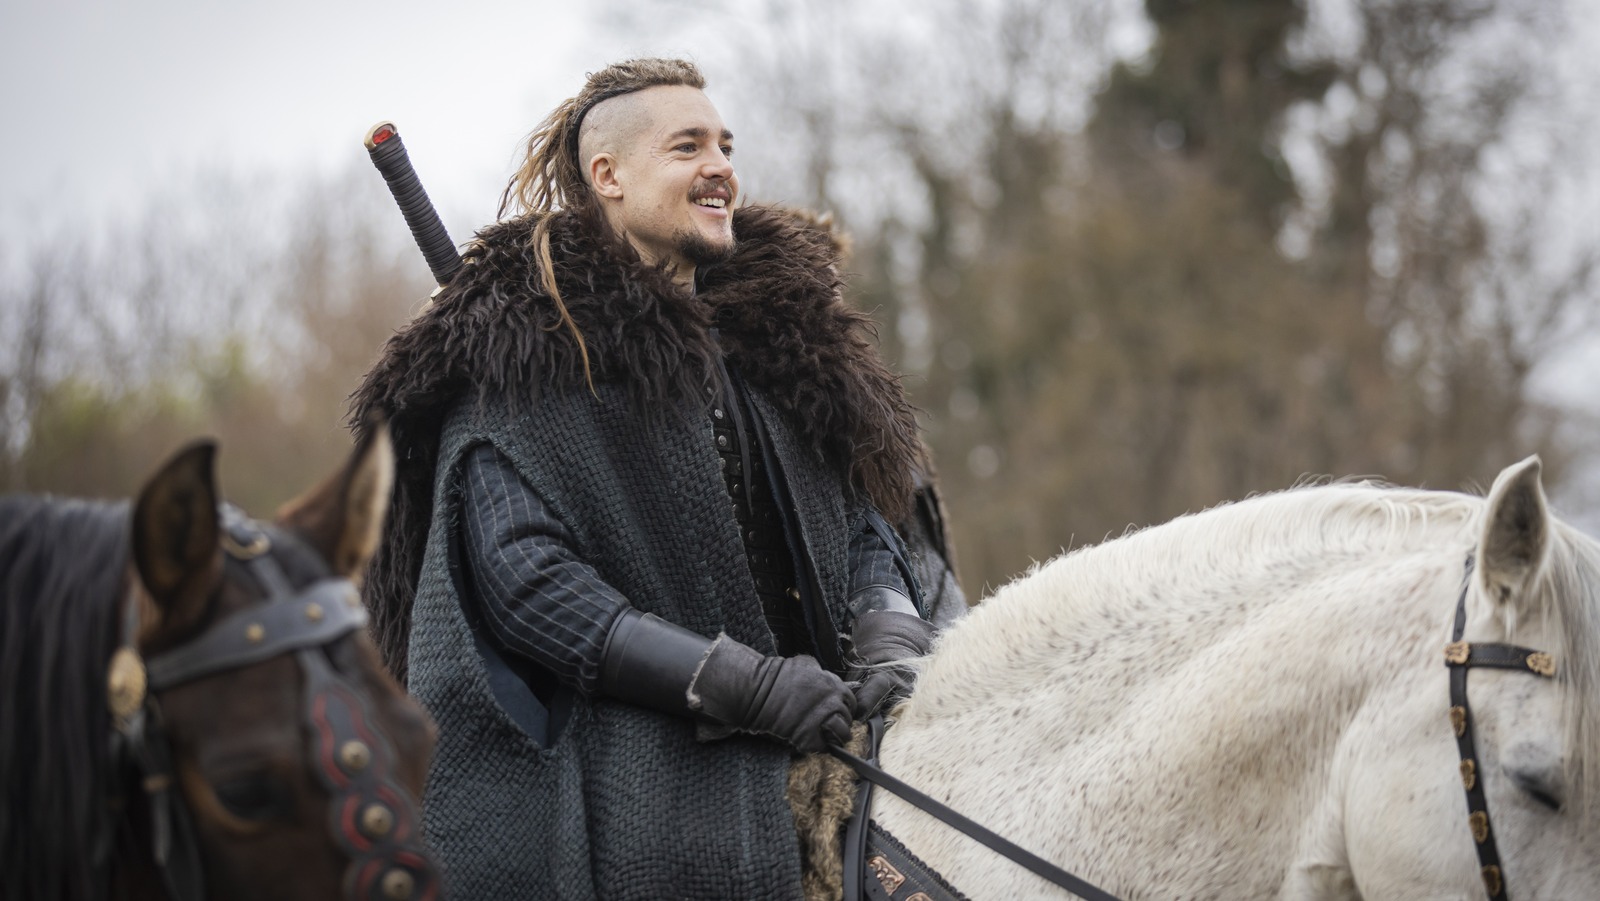 History Time - Today's Pivotal Person is Uhtred the Bold